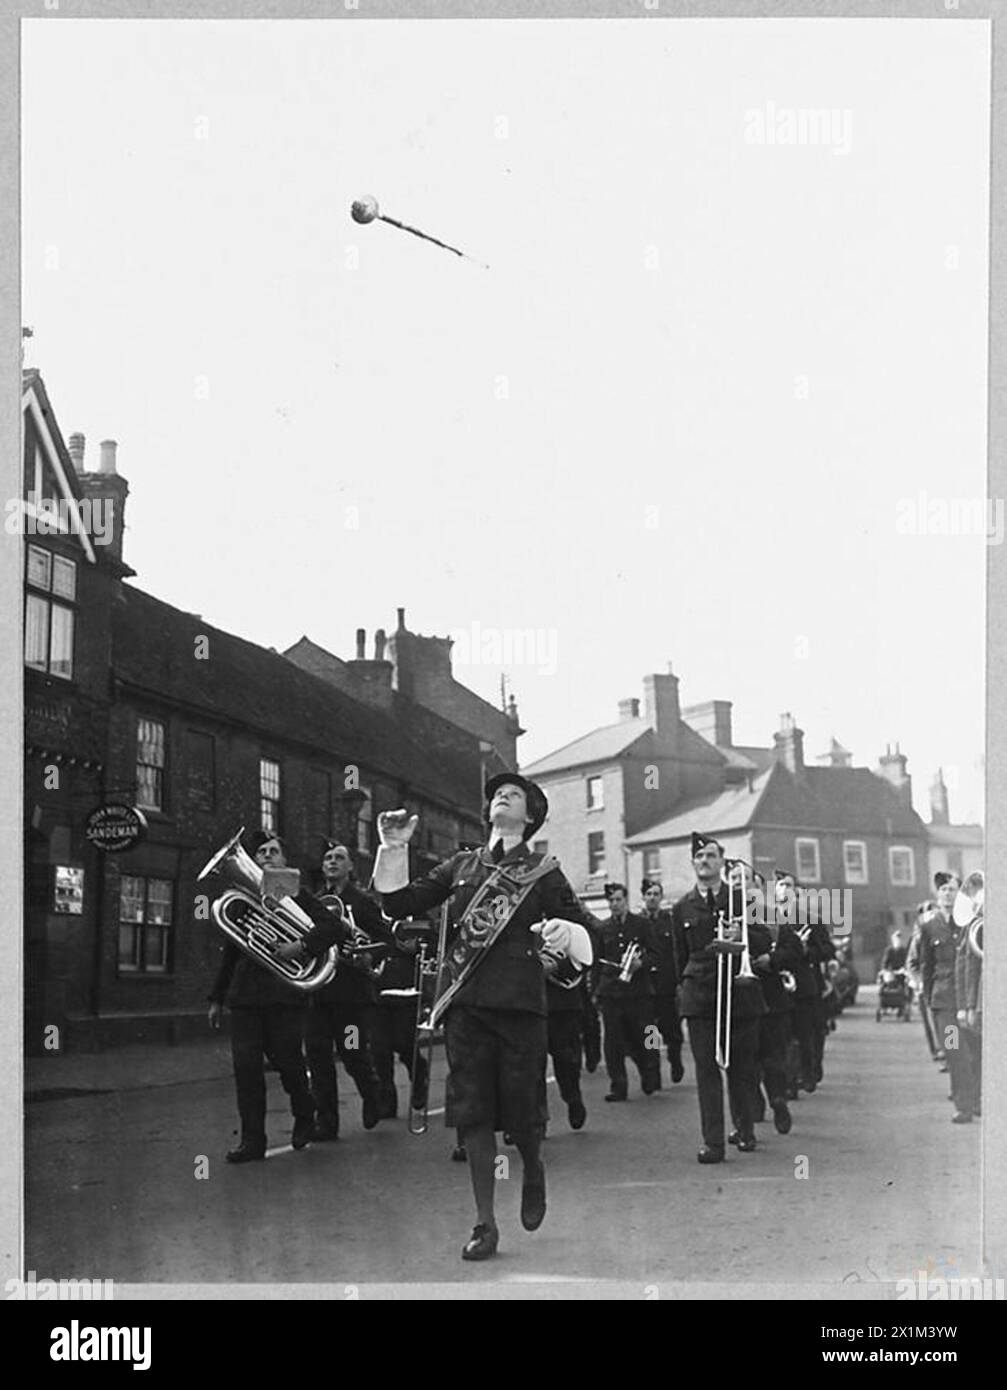 R.A.F. 25TH ANNIVERSARY PARADE IN HOME COUNTIES - W.A.A.F. drum major of an R.A.F. band throws her mace high into the air. The band headed the march past. [LACW M.Dorrington], Royal Air Force Stock Photo